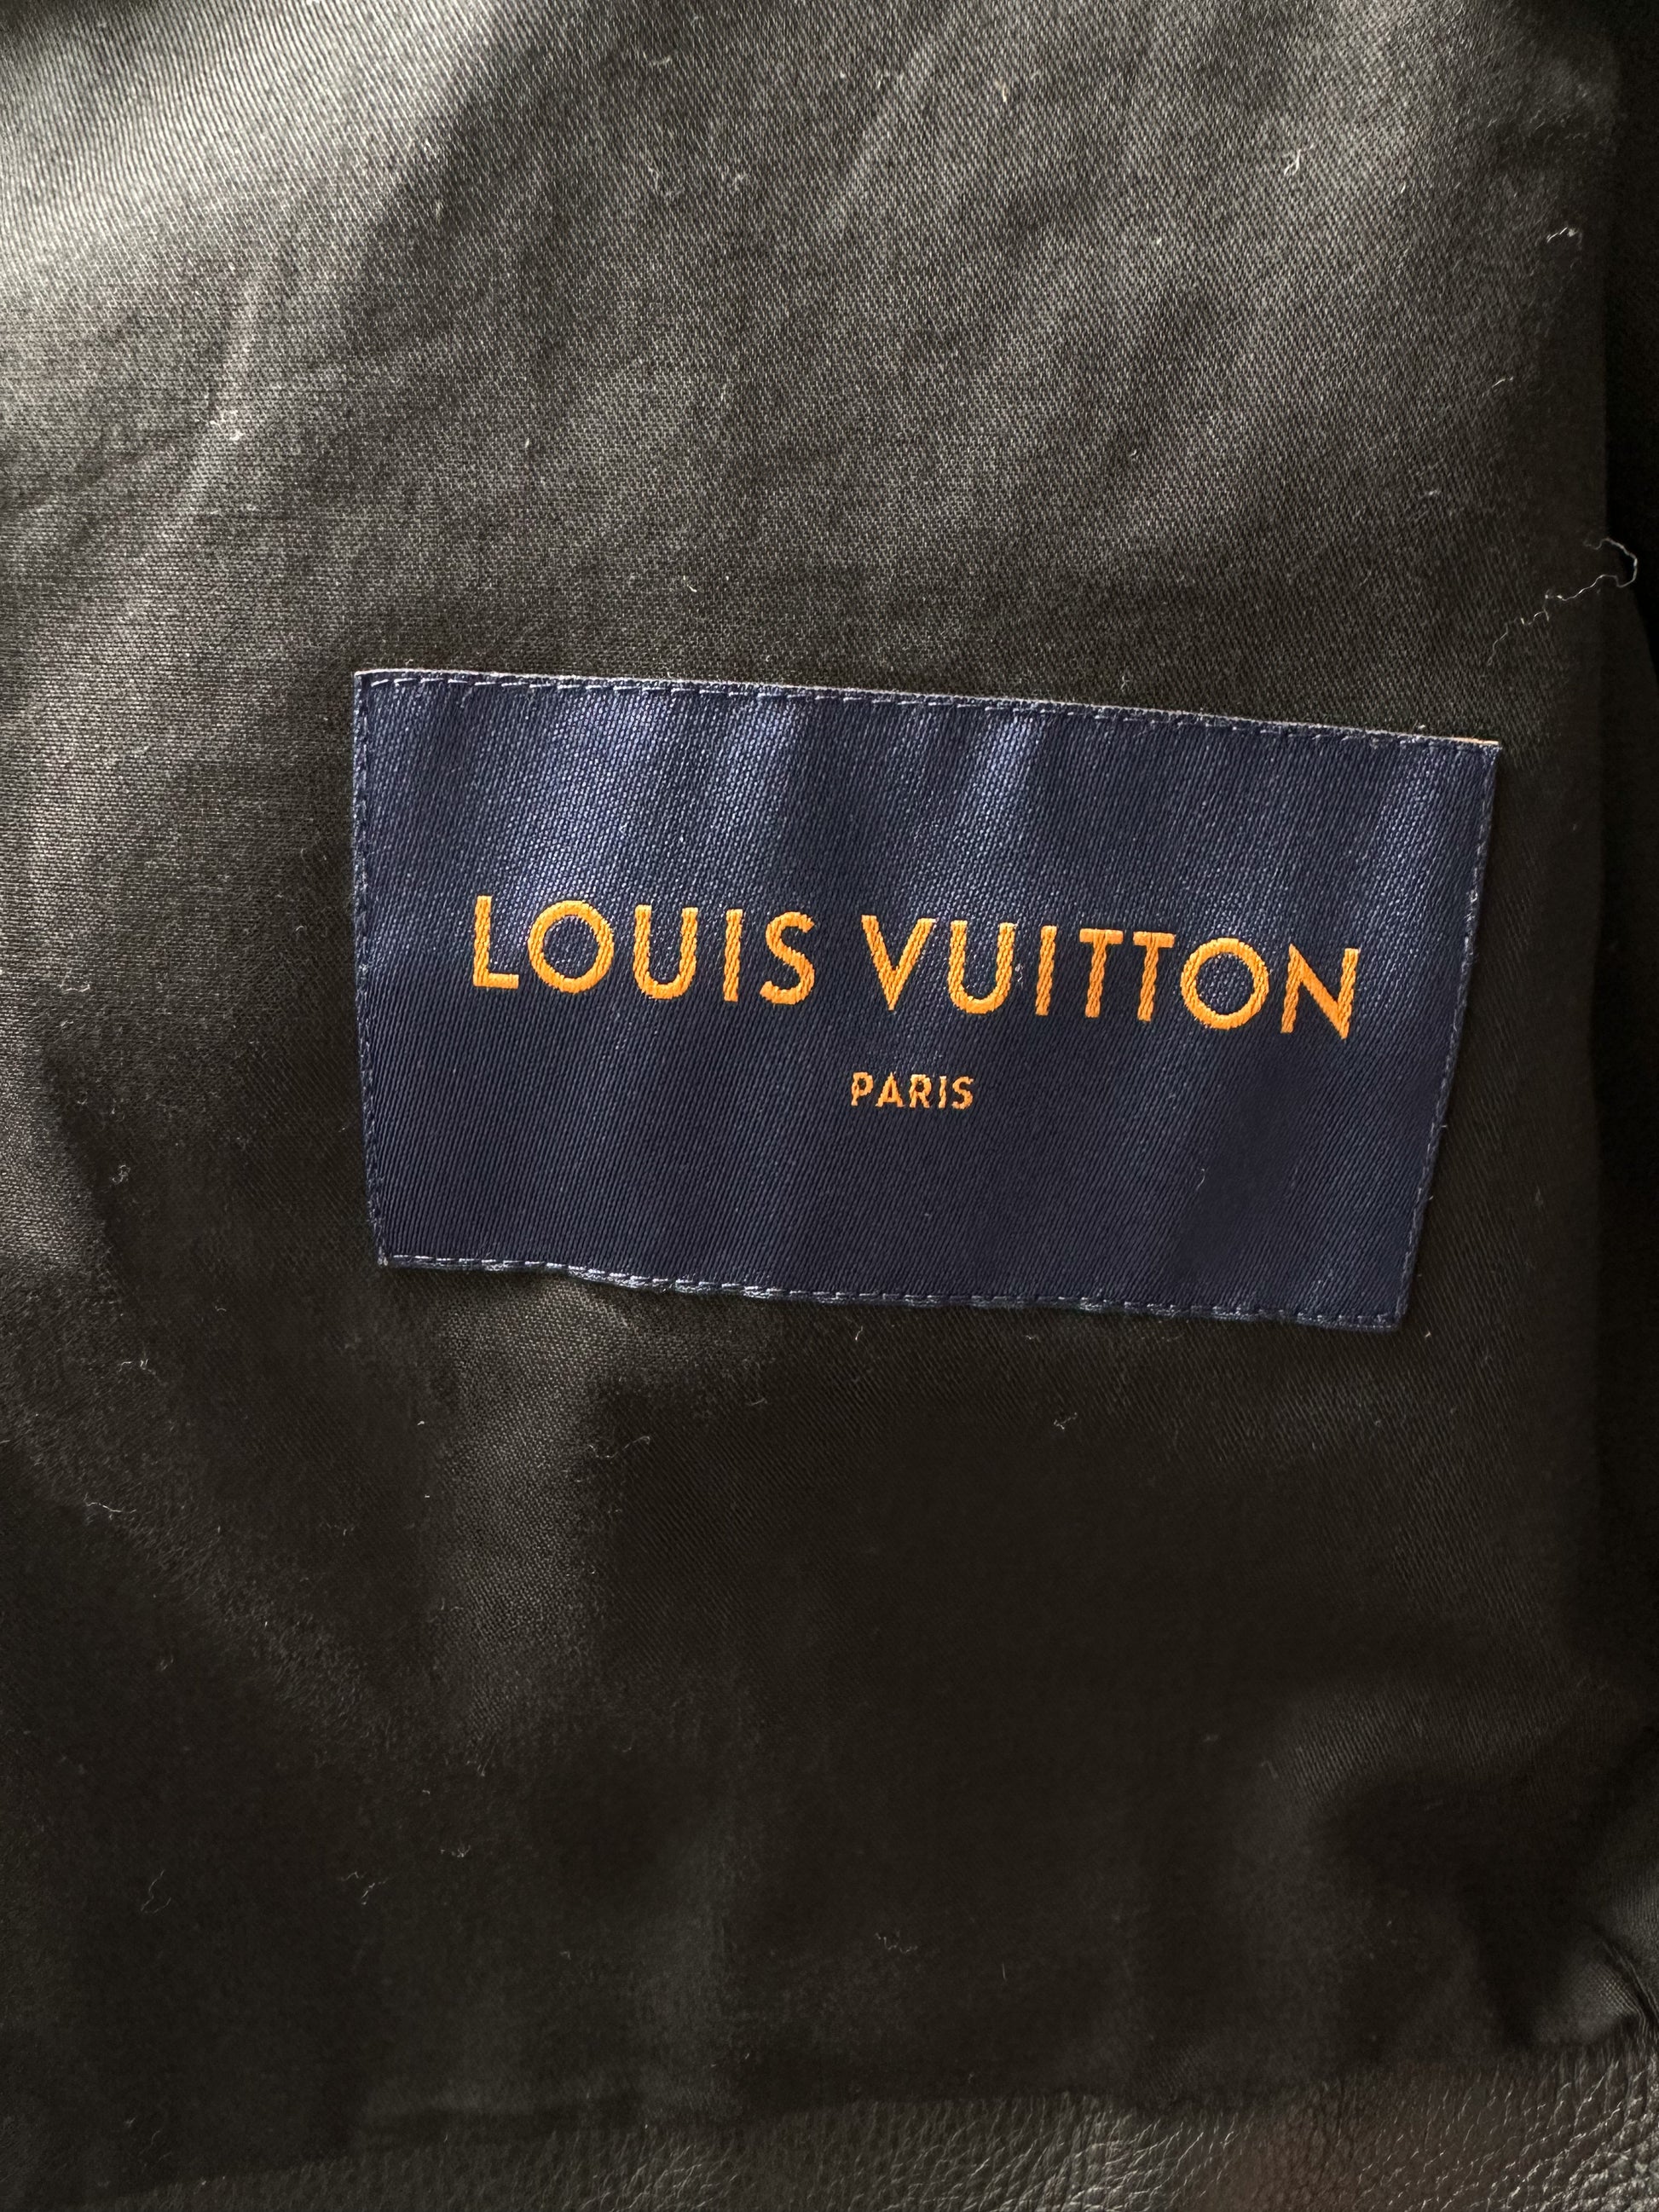 Louis Vuitton 'LV Sound Design and Record Club' Shearling Lamb Leather  Trucker Jacket w/ Tags - Brown Outerwear, Clothing - LOU441599